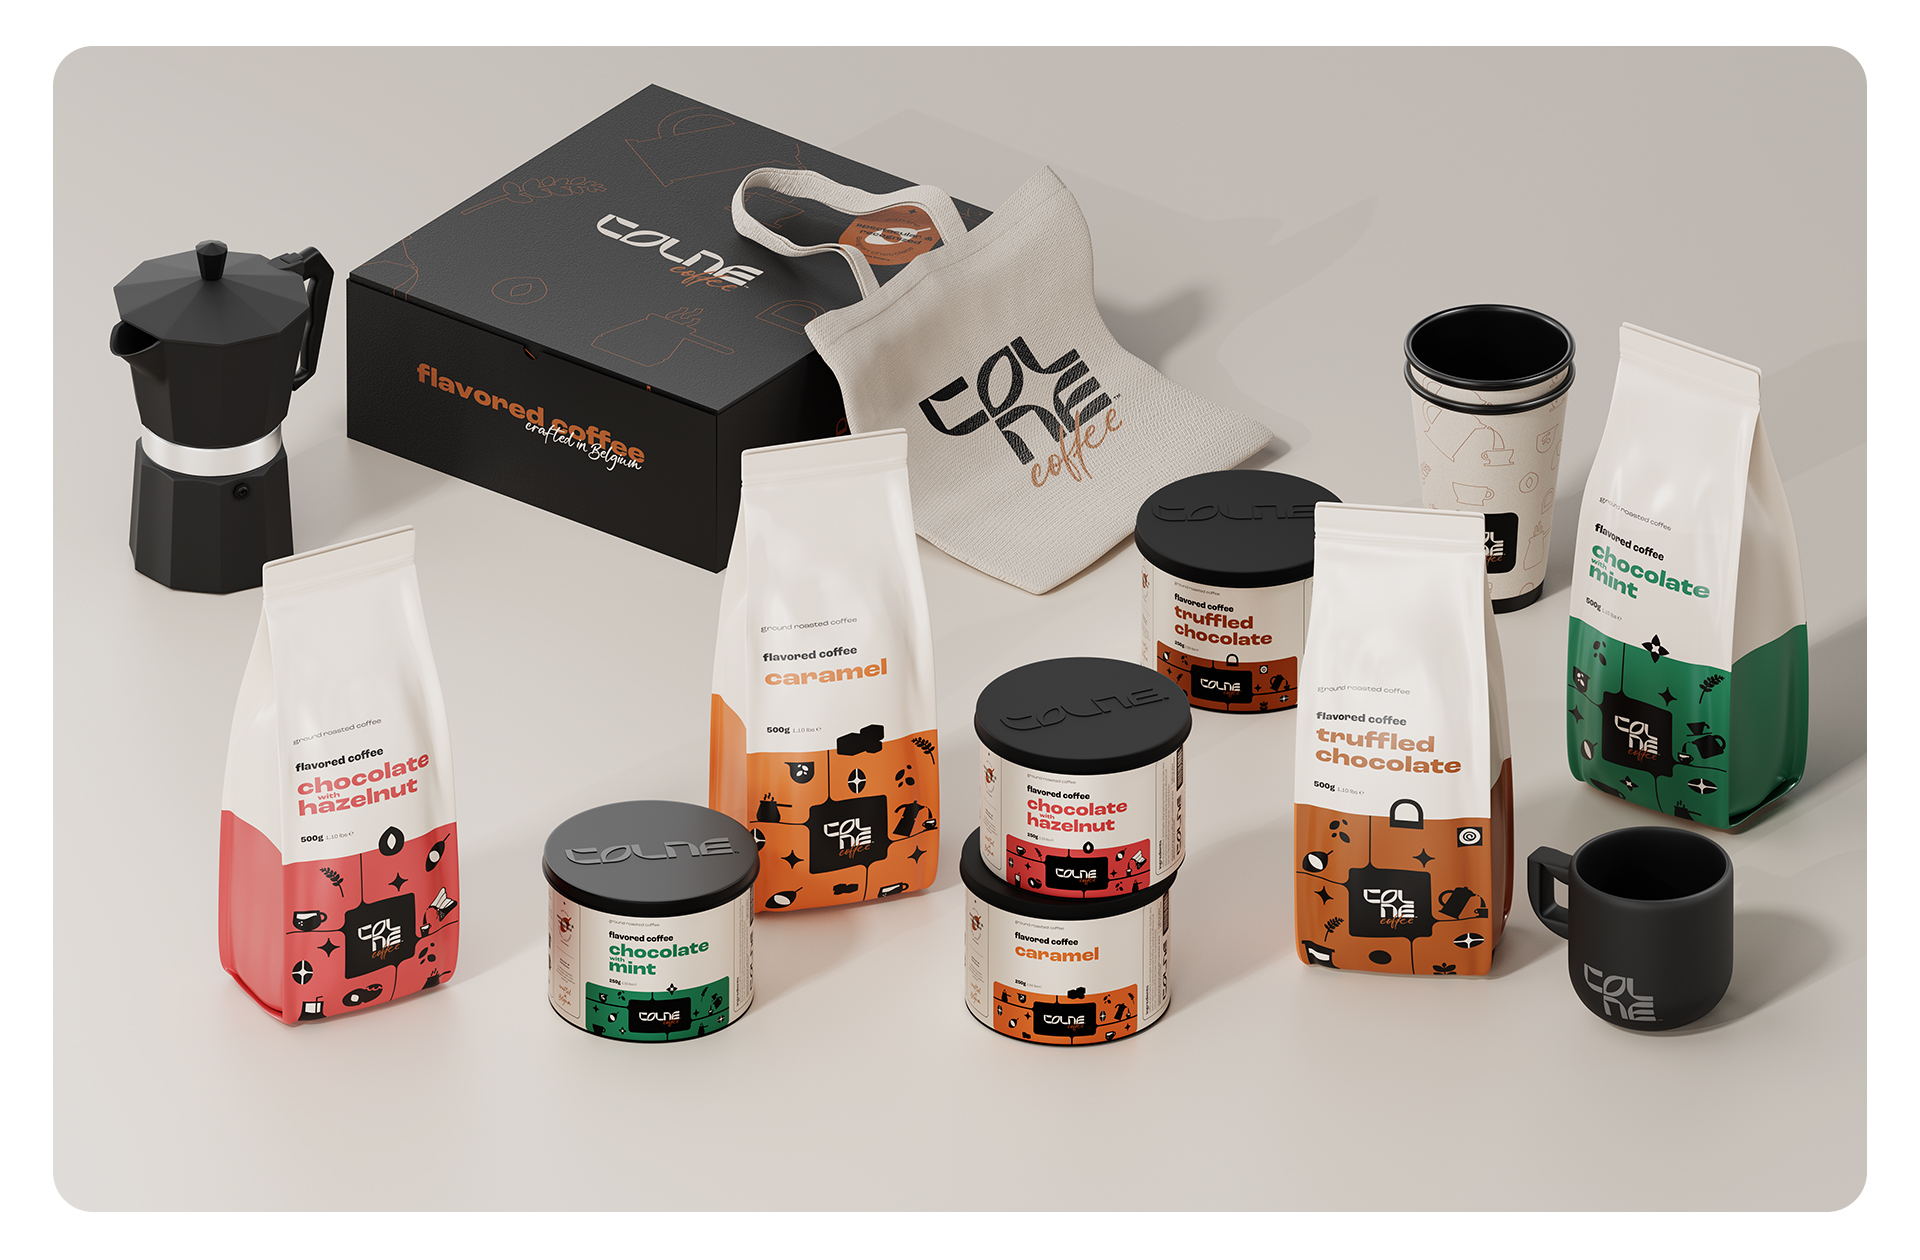 Branding And Packaging Of Colne Coffee